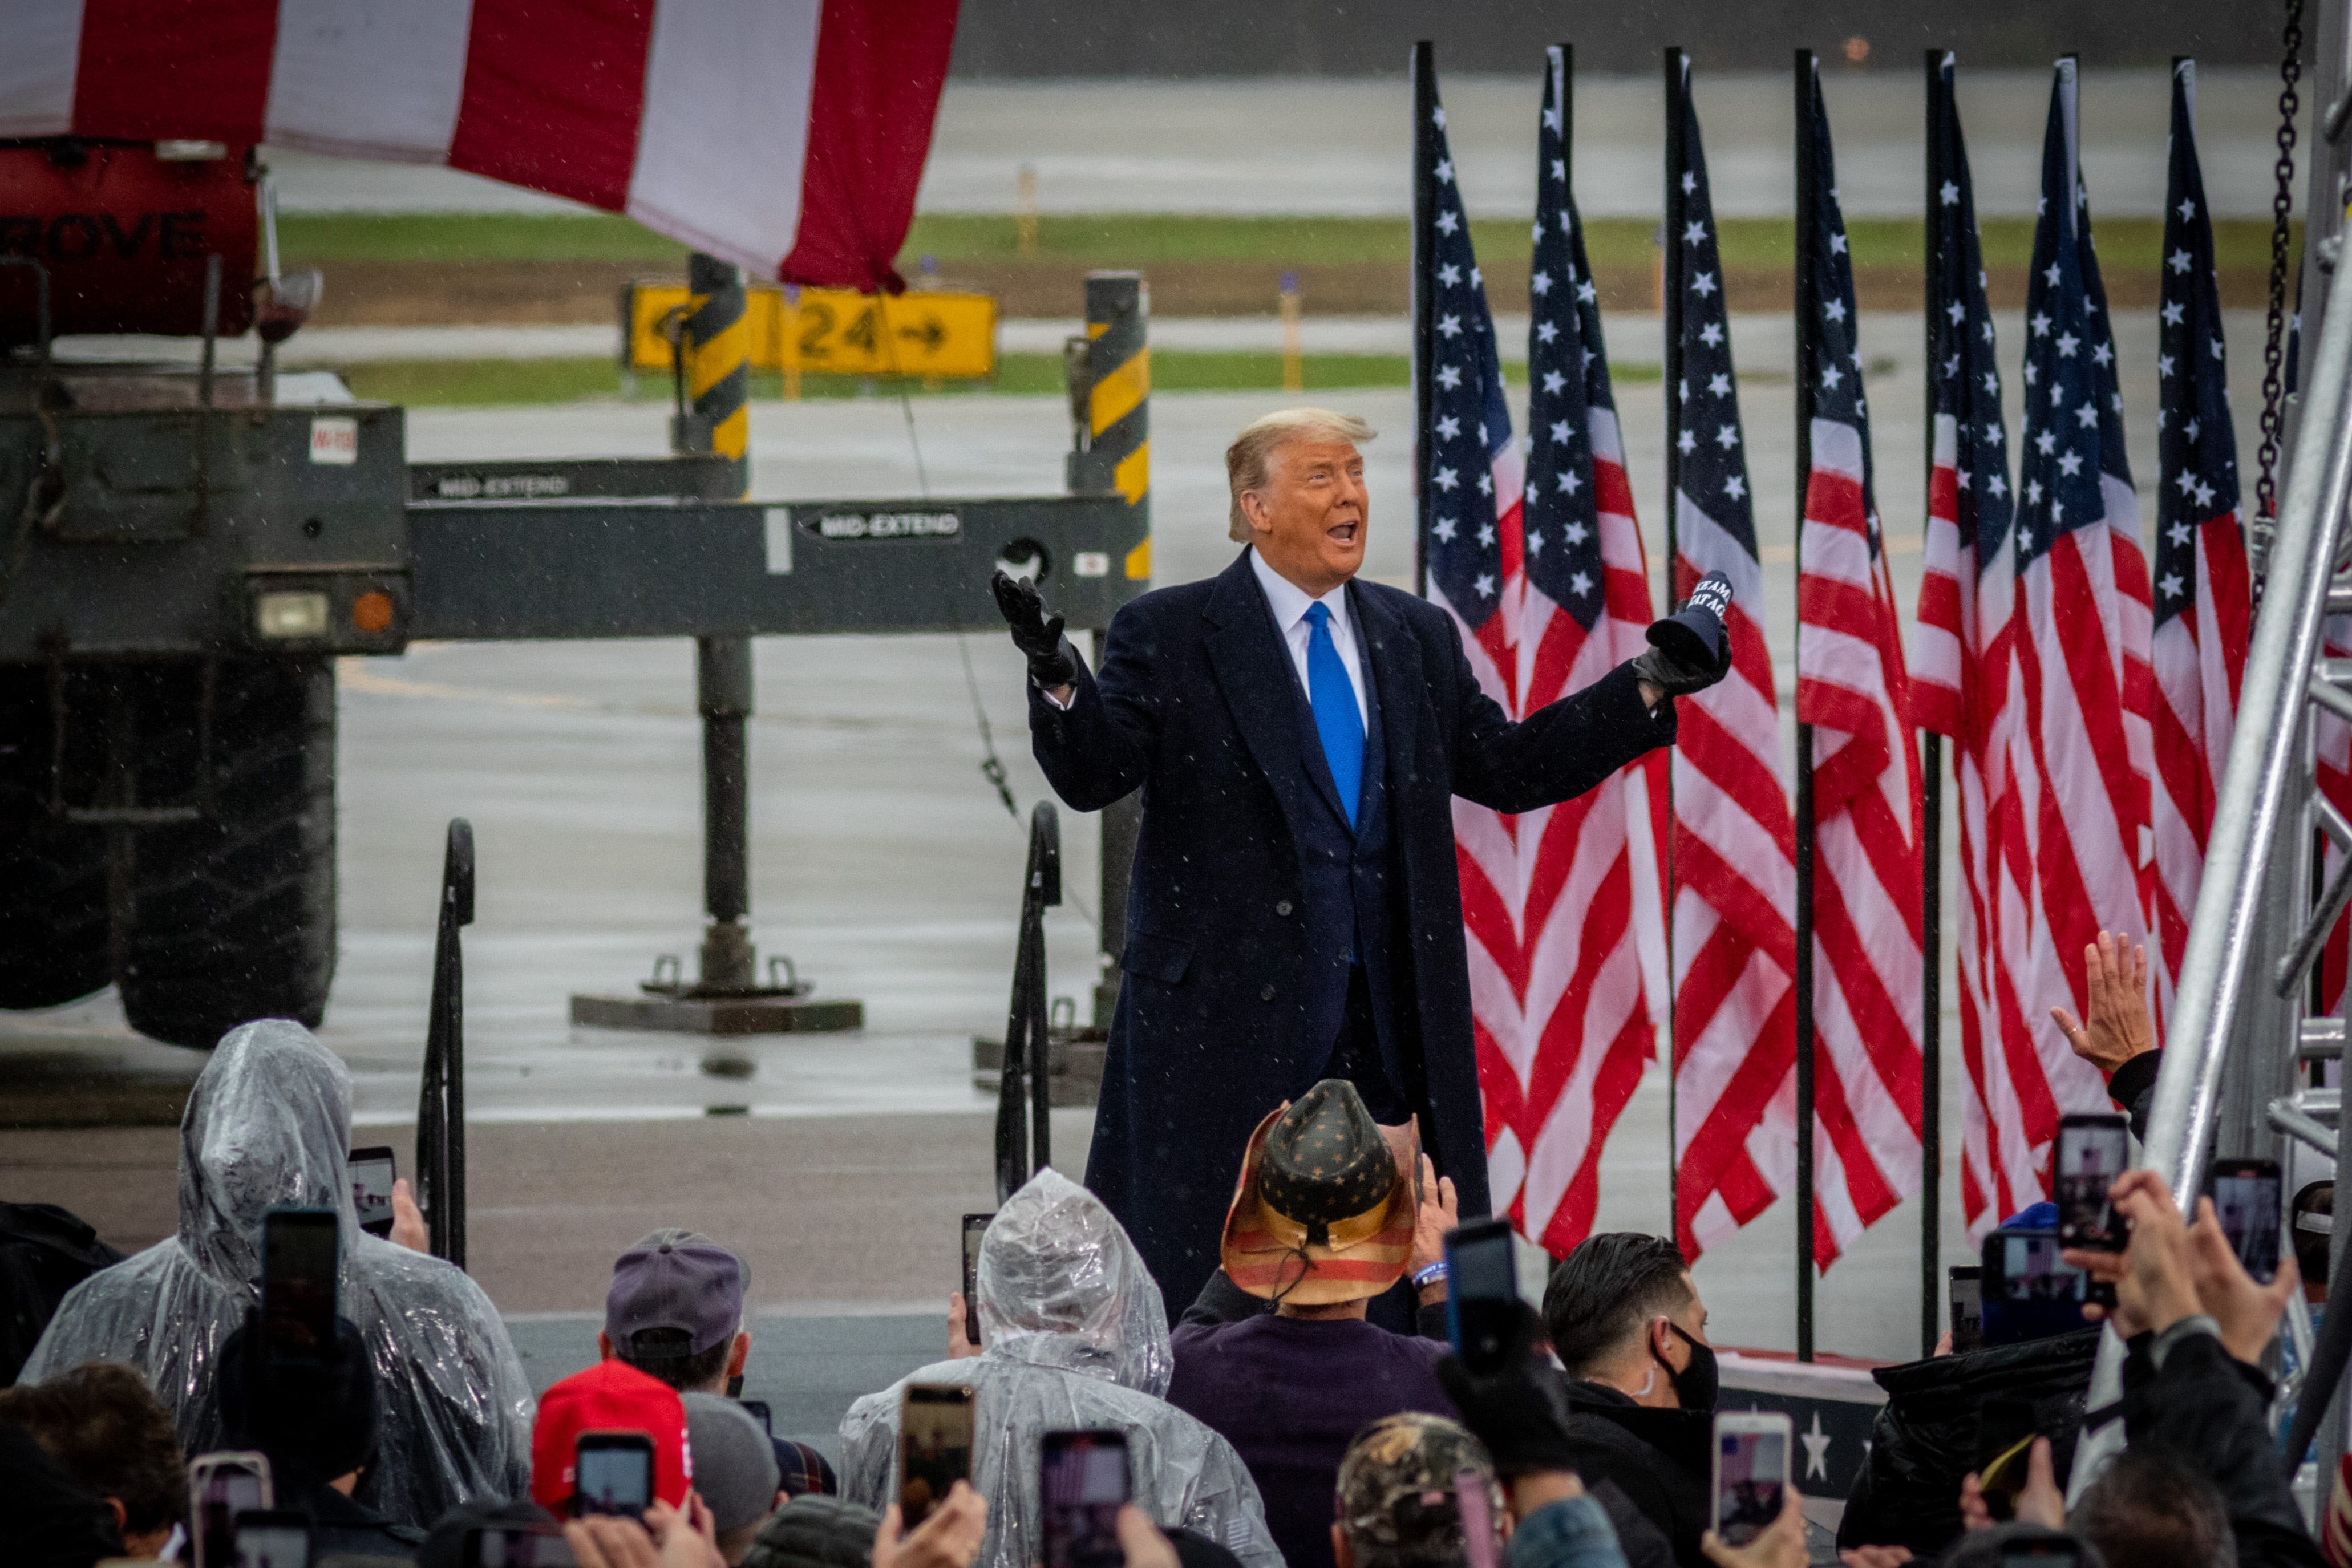 President Donald Trump reacts to the rain as he arrives at his campaign rally in Lansing.